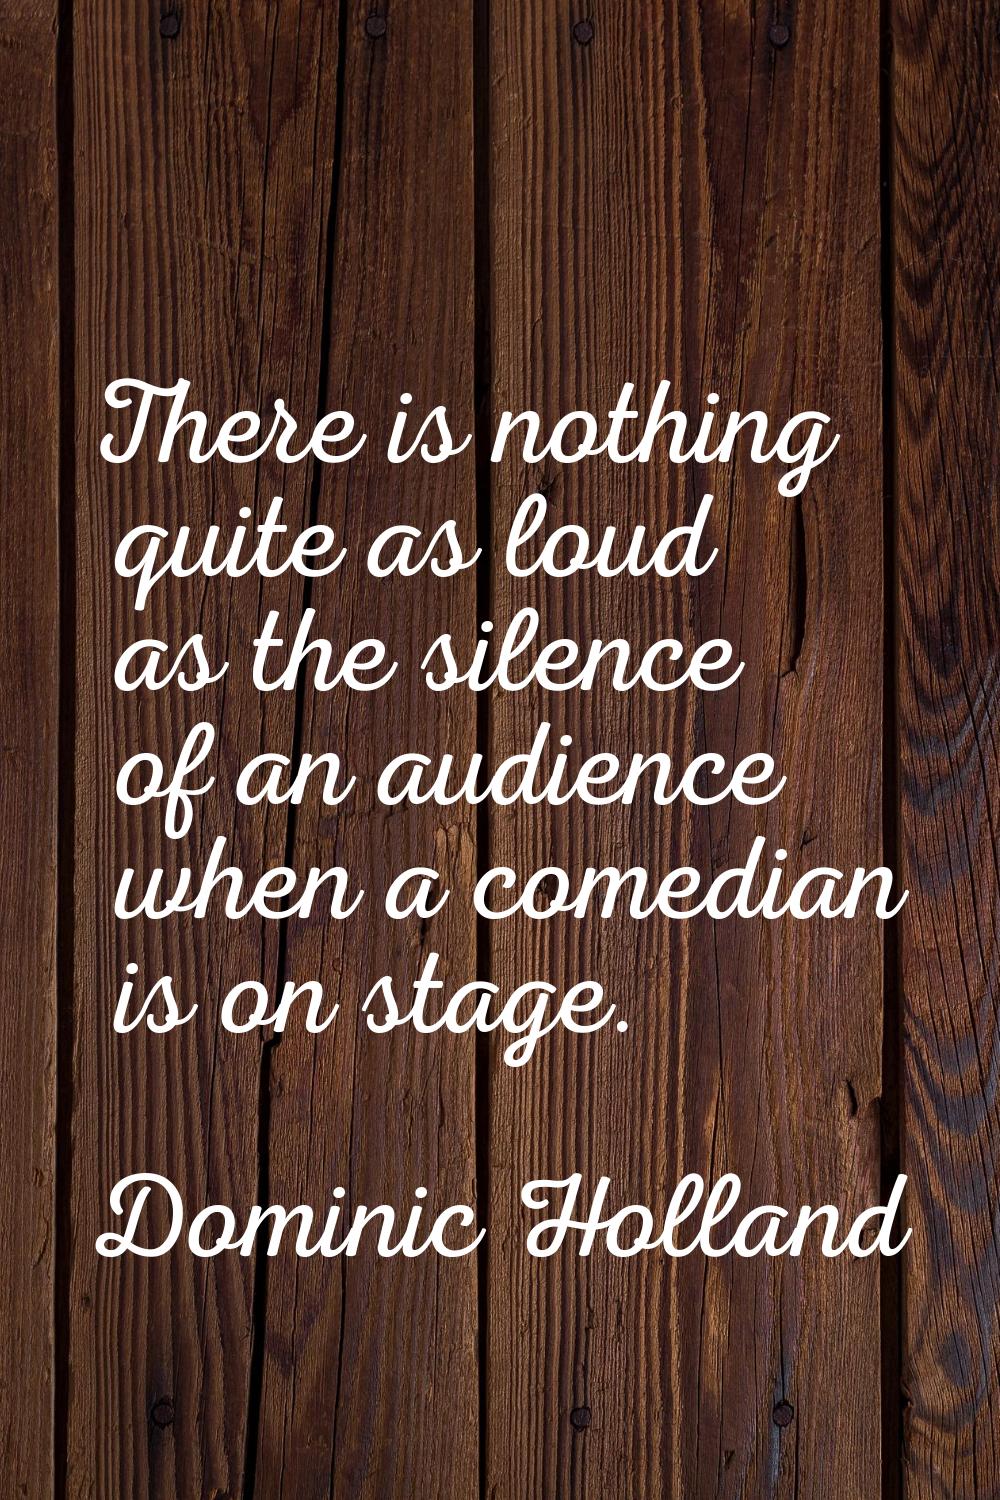 There is nothing quite as loud as the silence of an audience when a comedian is on stage.